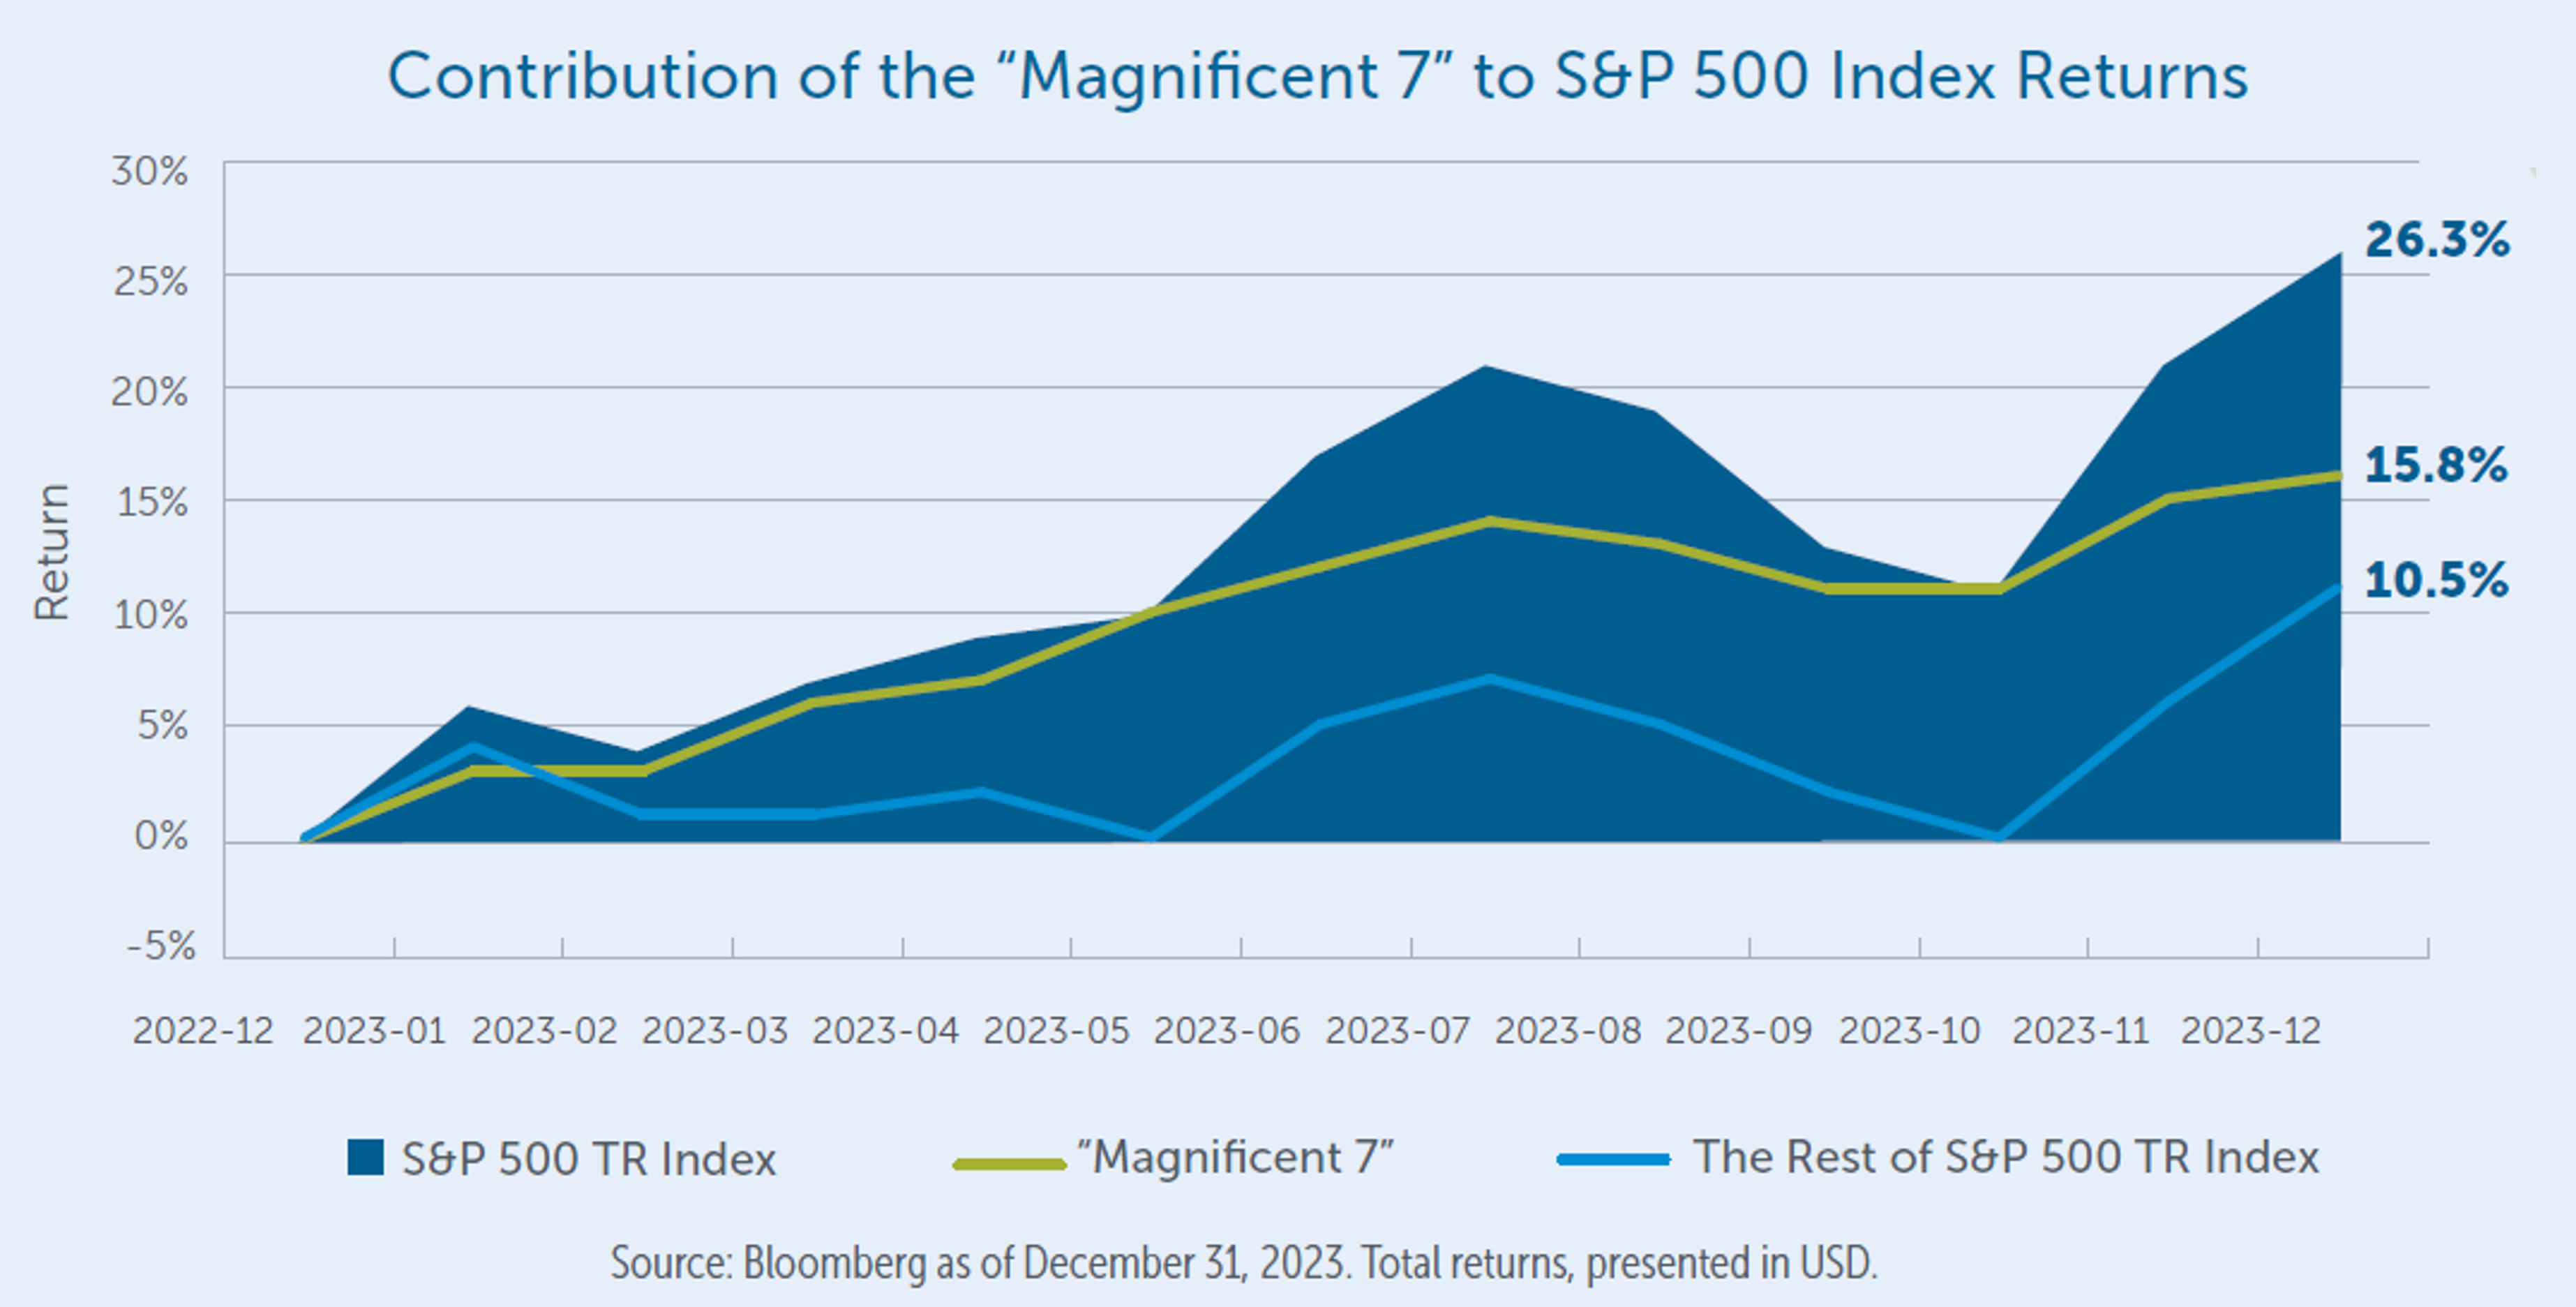 Graph showcasing increasing contribution from December 2022 between the S&P 500 and the Magnificent 7, as well as the totals, with the Magnificent 7 being higher the majority of the time.